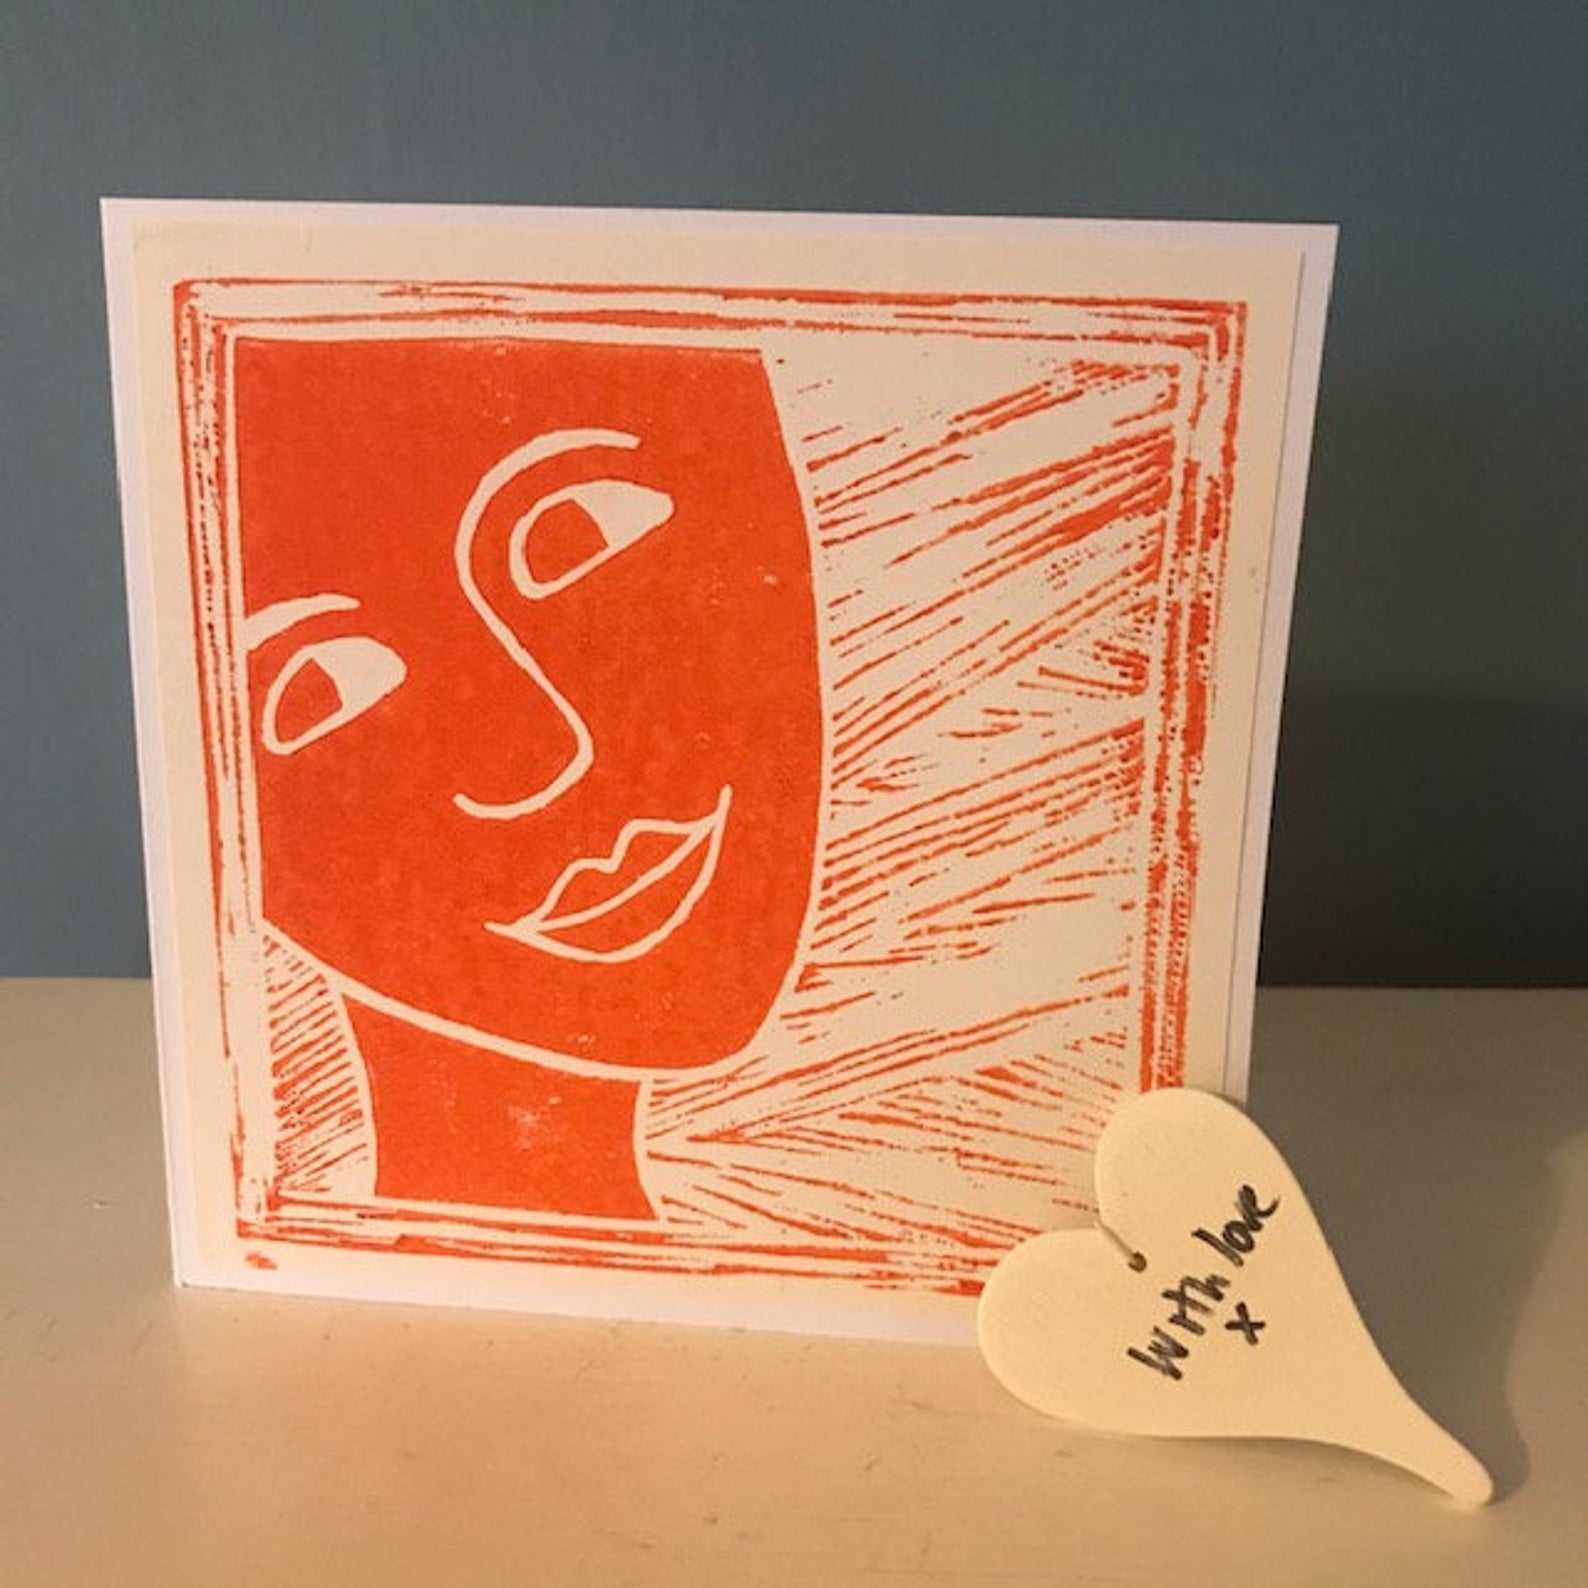 Face II Hand printed lino cut greeting card. Blank inside for your very own message.